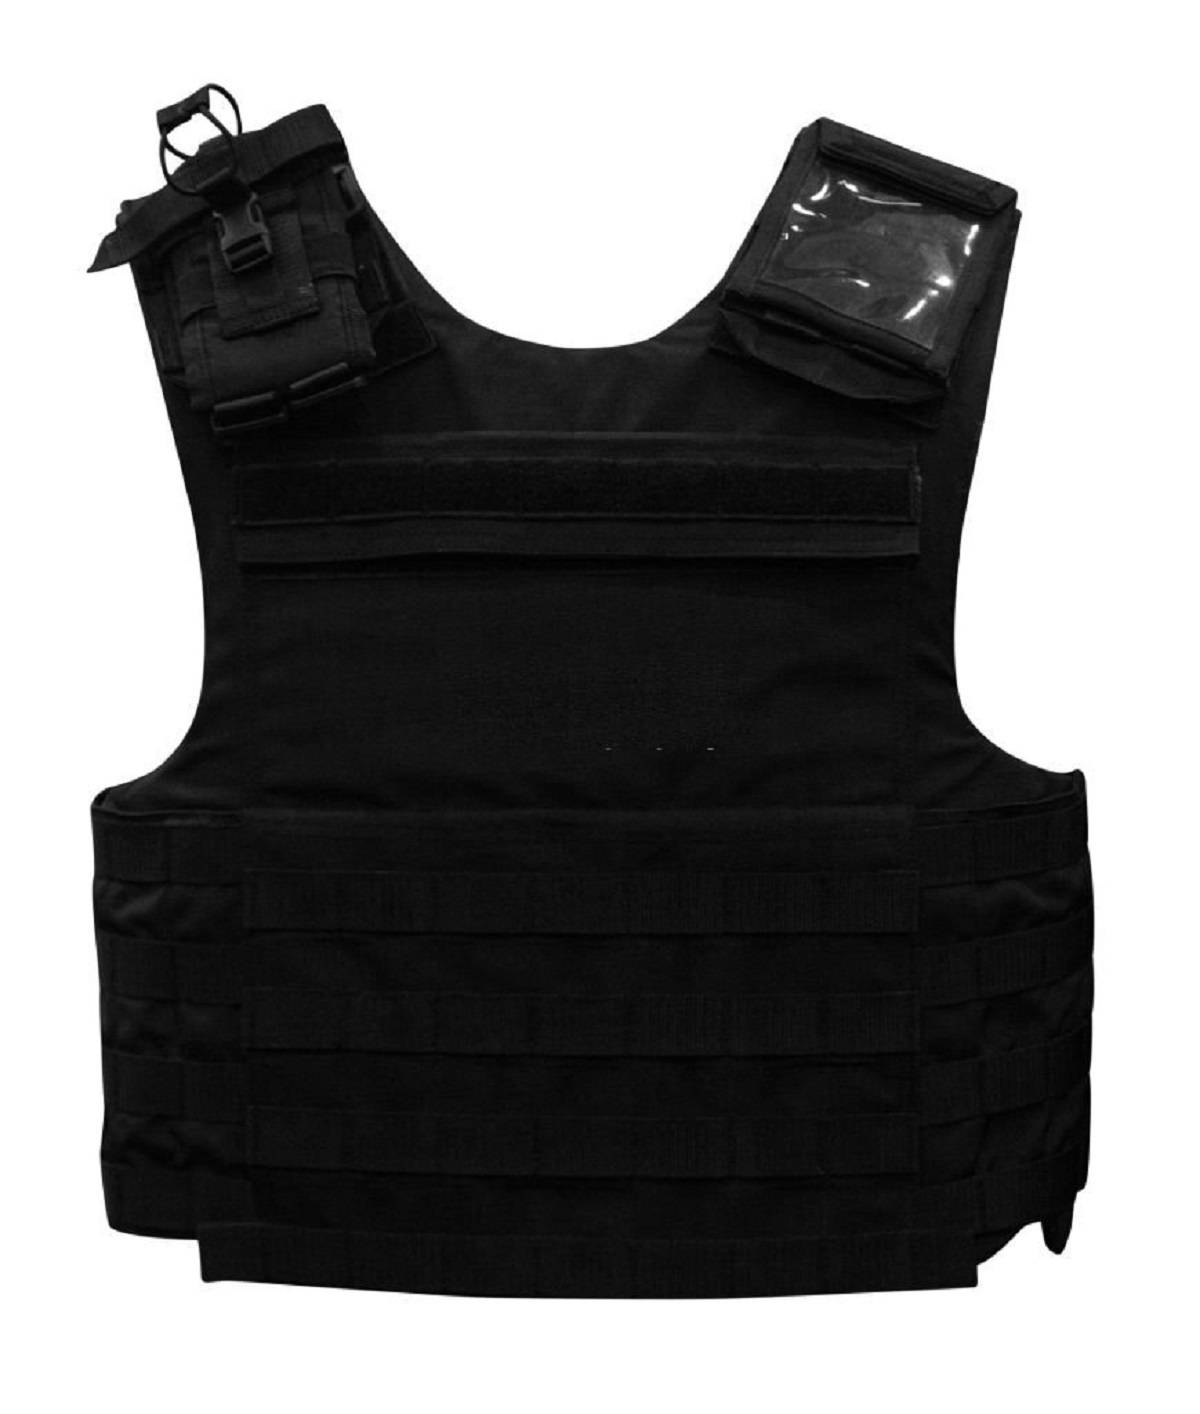 Security Vest: Ensuring Safety in High-Risk Environments